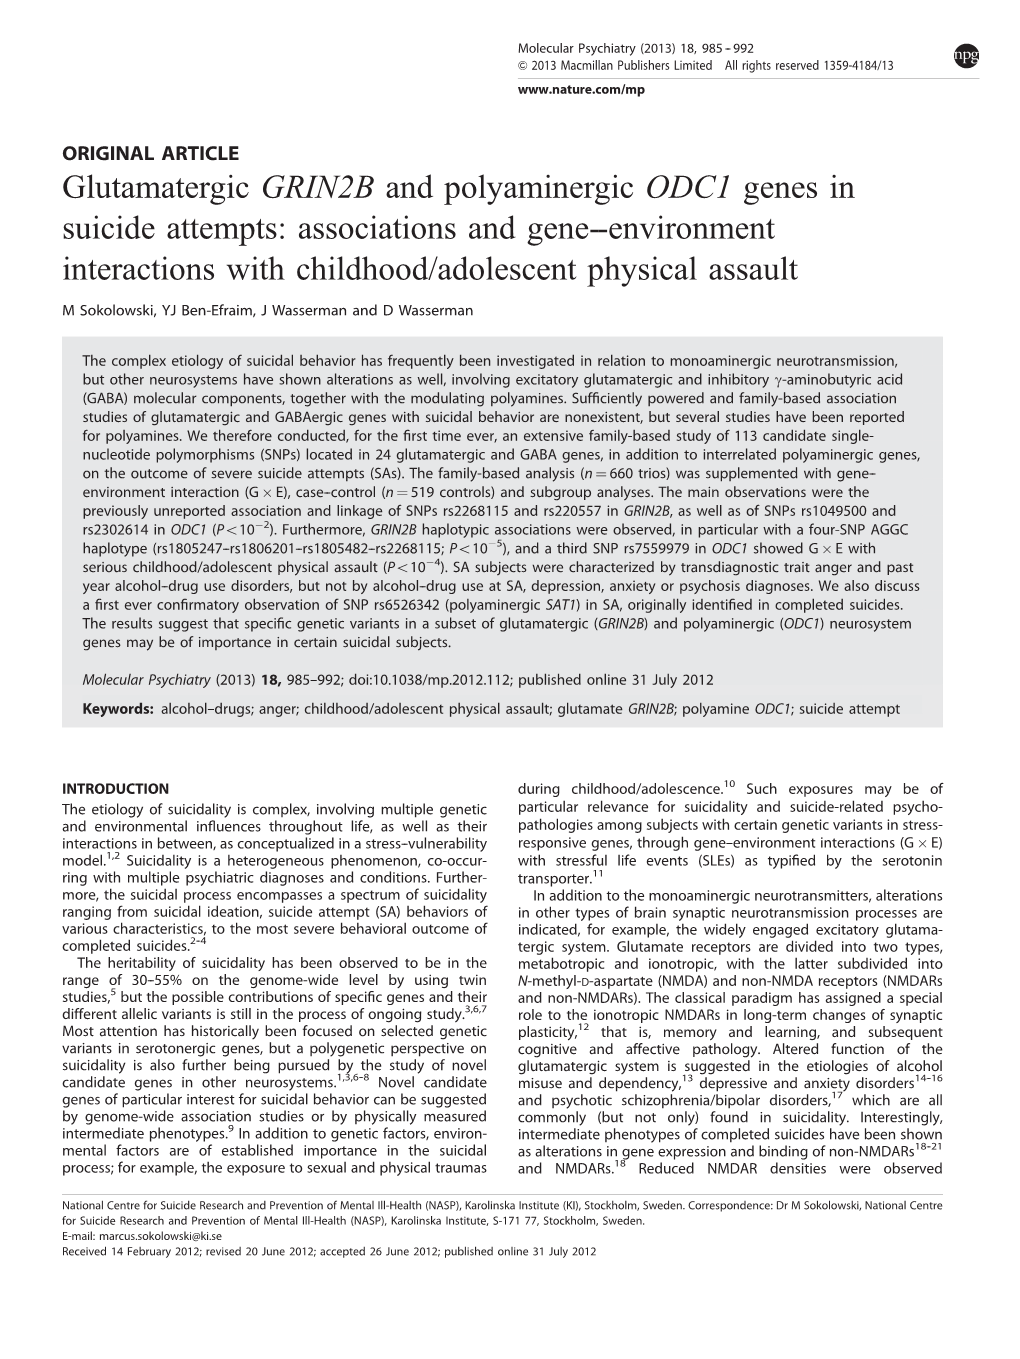 Glutamatergic GRIN2B and Polyaminergic ODC1 Genes in Suicide Attempts: Associations and Gene--Environment Interactions with Childhood/Adolescent Physical Assault